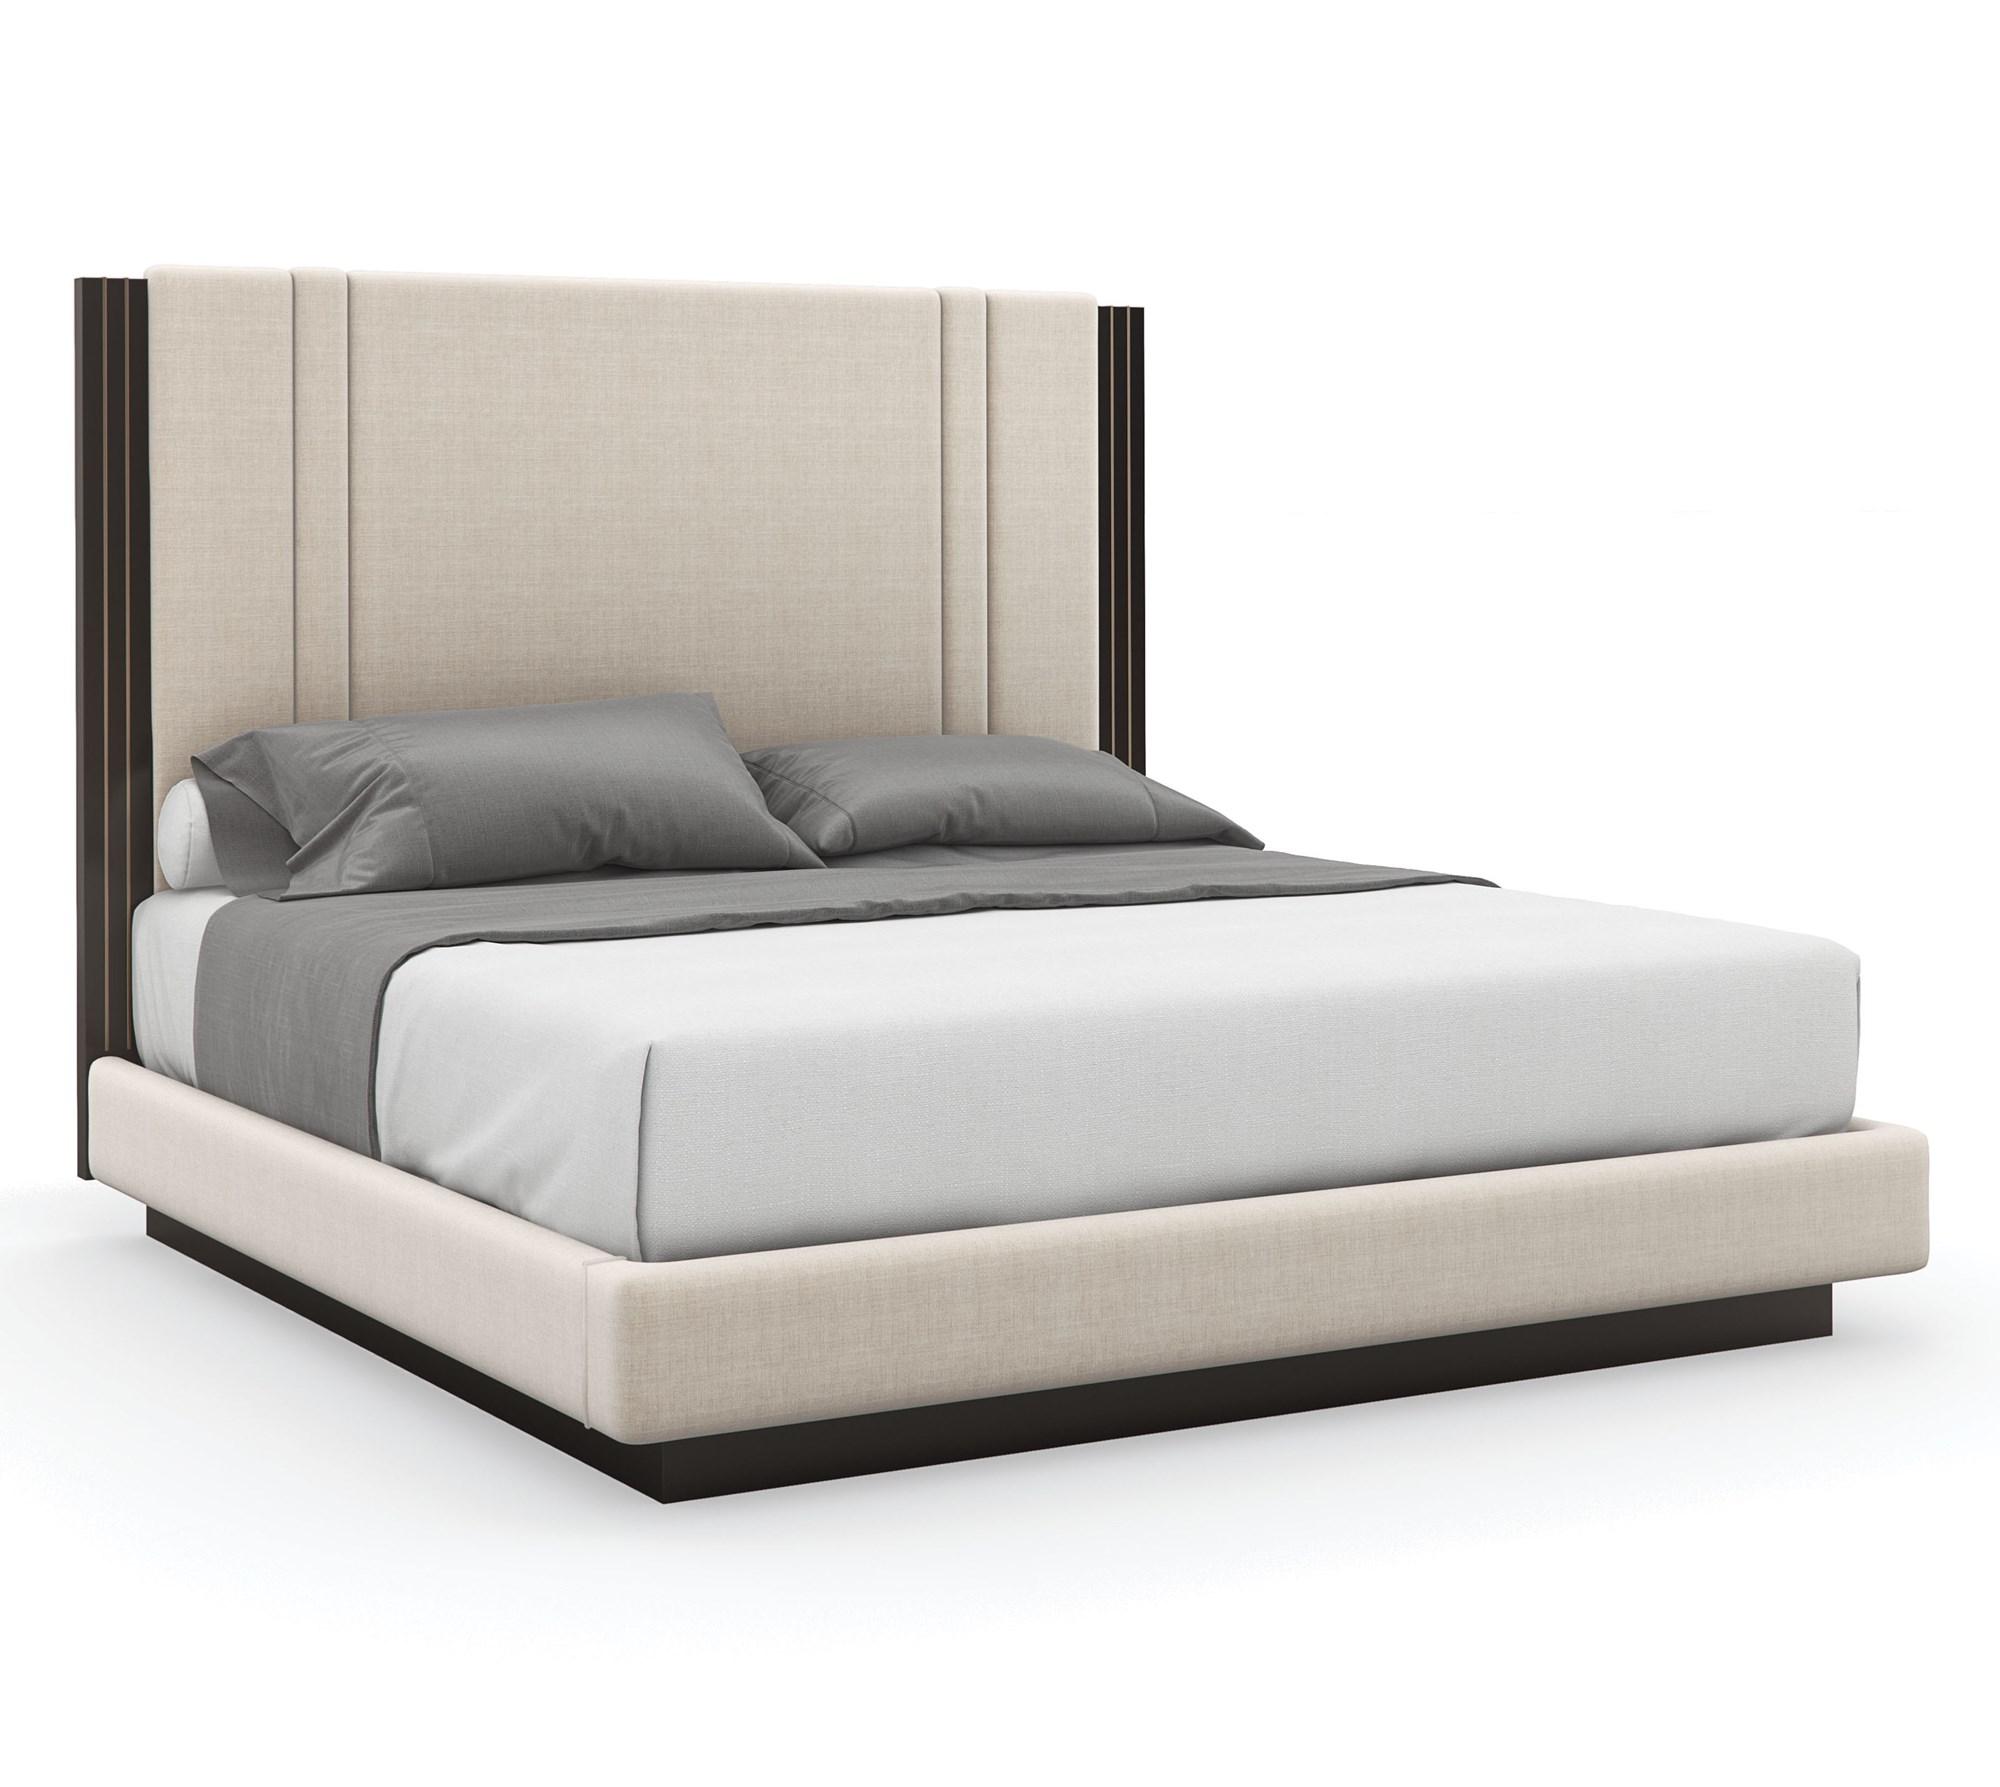 Contemporary Platform Bed DECENT PROPOSAL CLA-020-125 in Light Gray Fabric